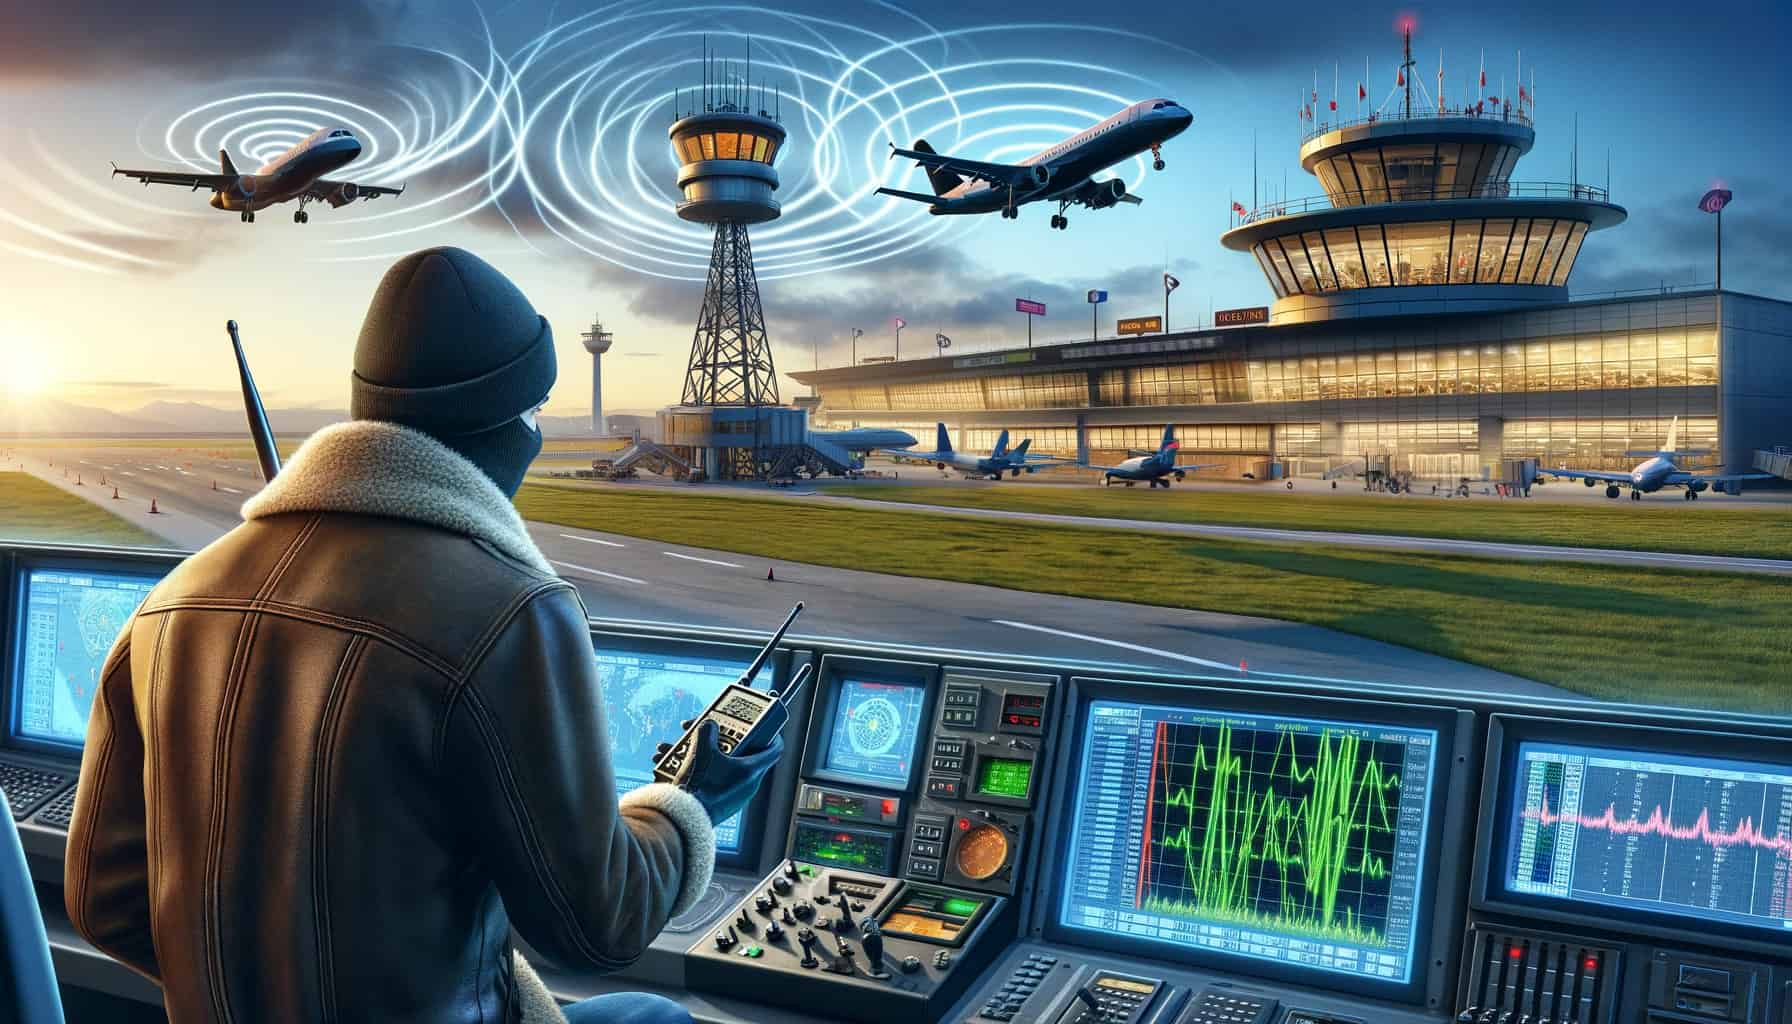 Airport controller with jammer against a background of soaring aircraft and radar screens